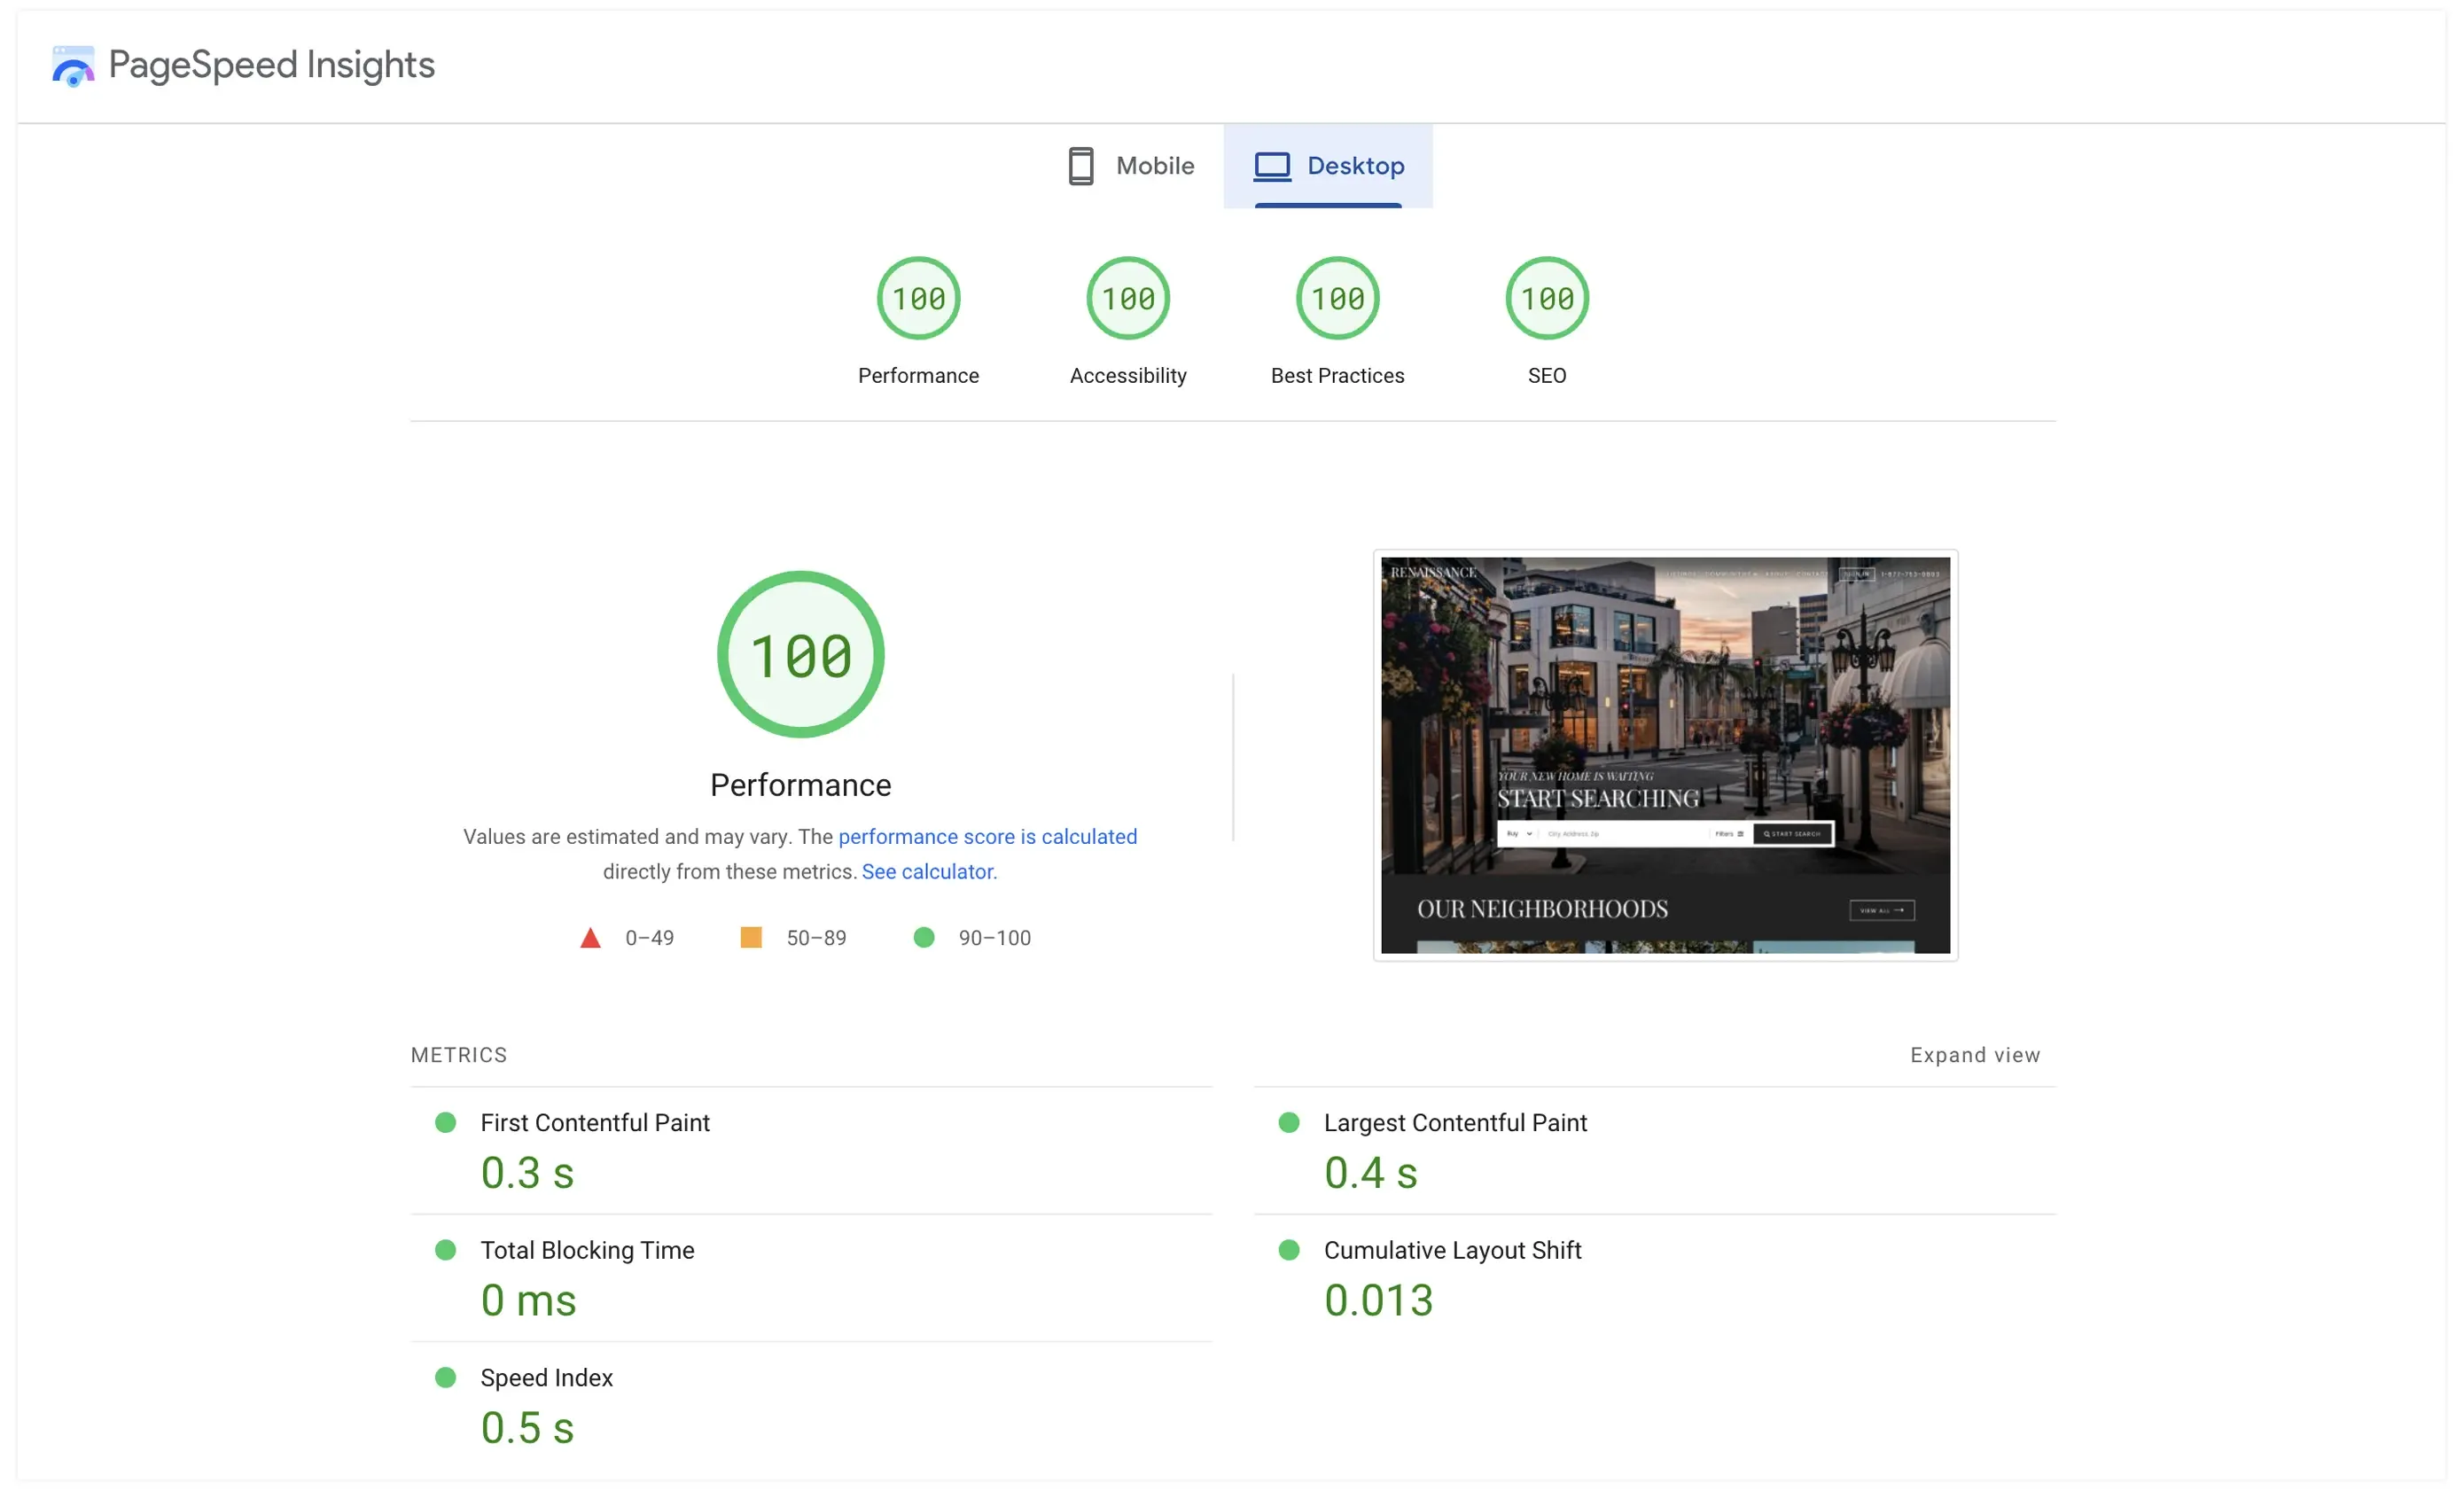 Real Estate Webmasters' PageSpeed full 100 scores on desktop for Performance, Accessibility, Best Practices and SEO - a great example of a fast website.